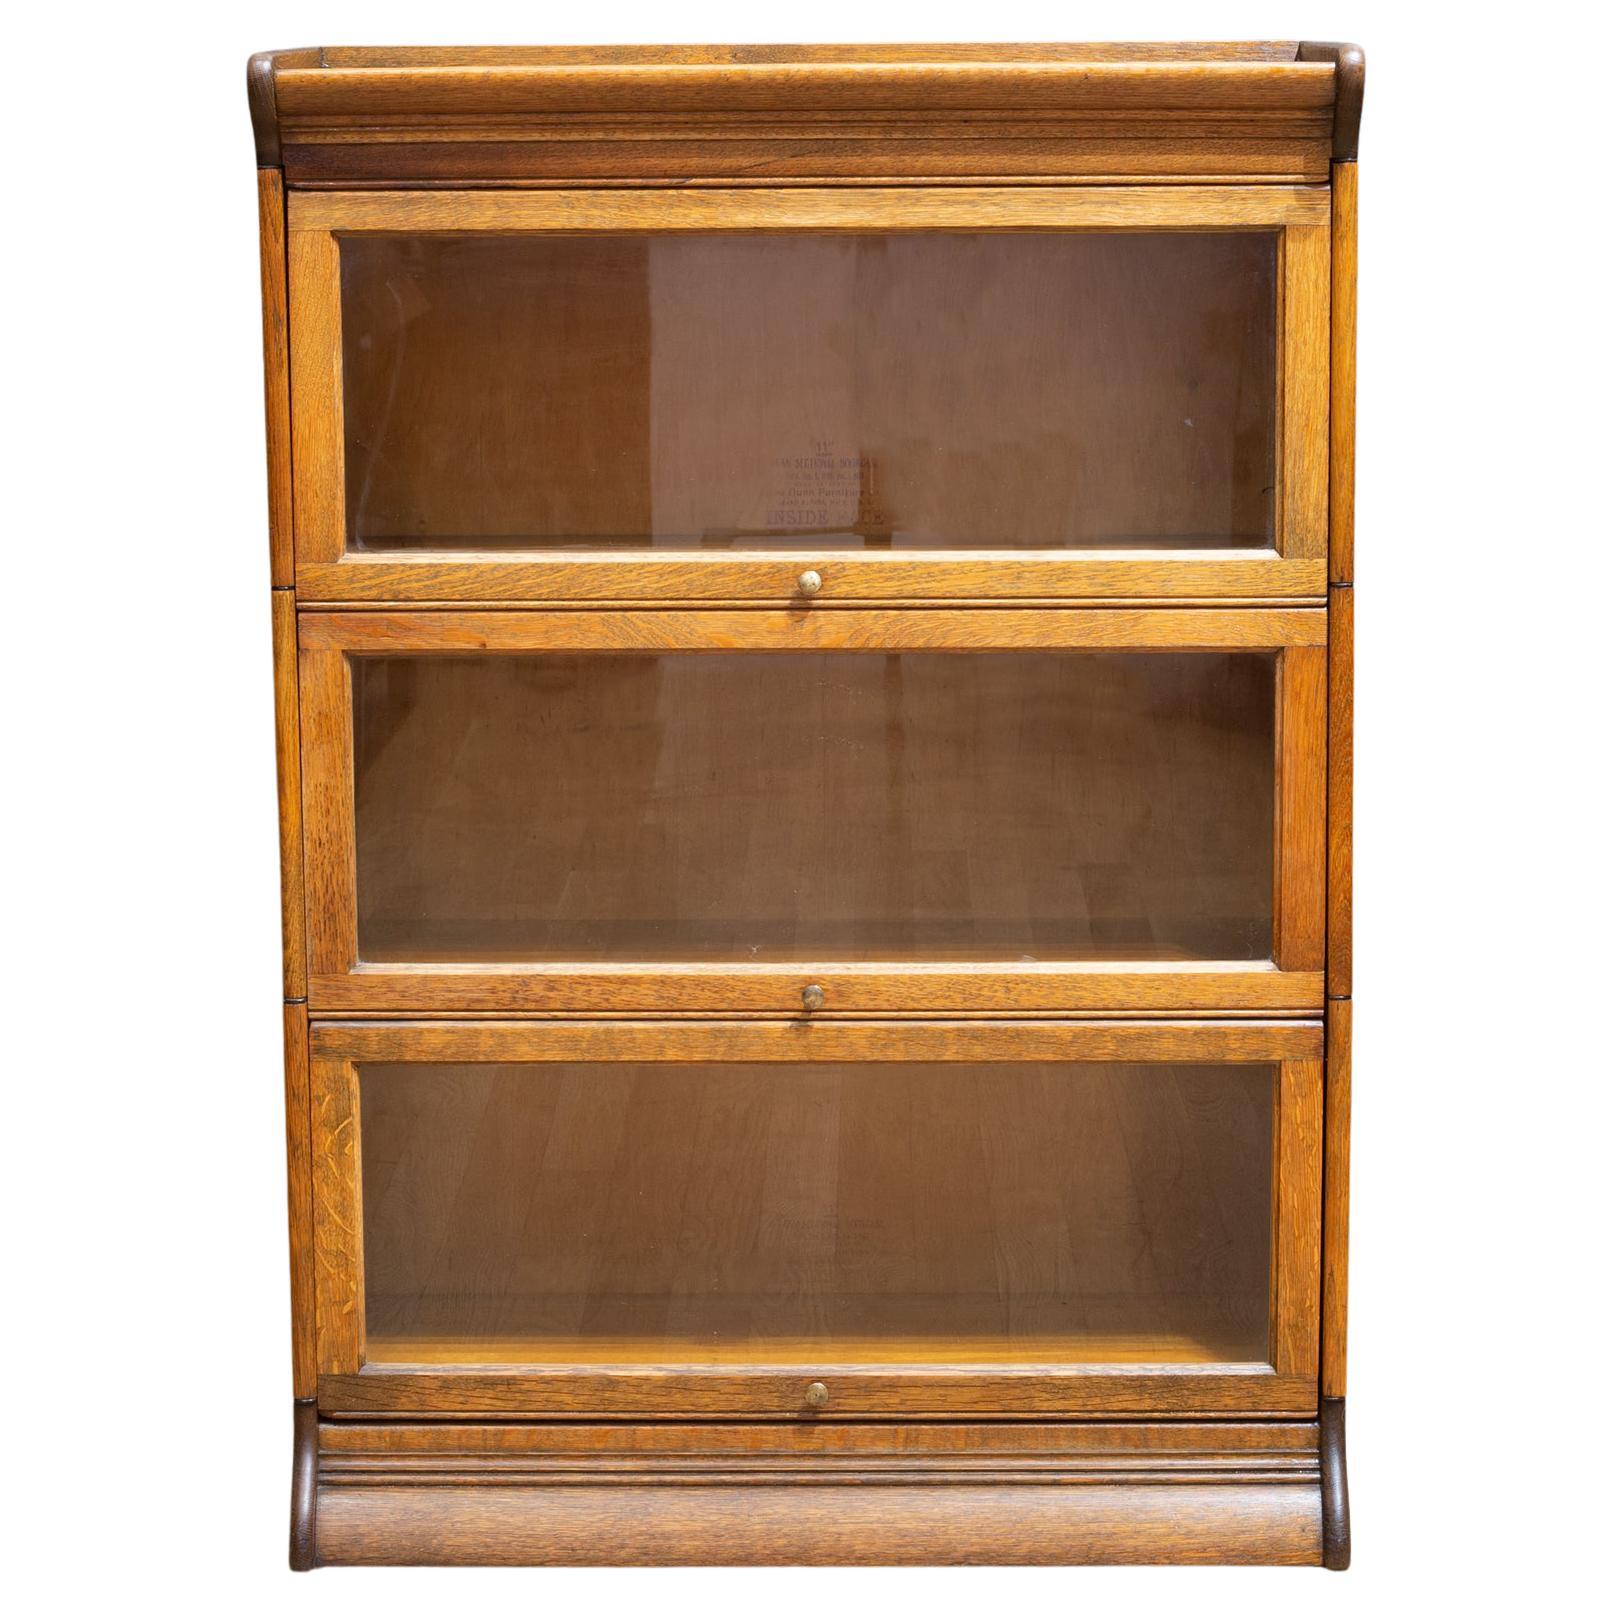 Late 19th c. Gunn Furniture Co. 3 Stack Lawyer's Bookcase c.1899